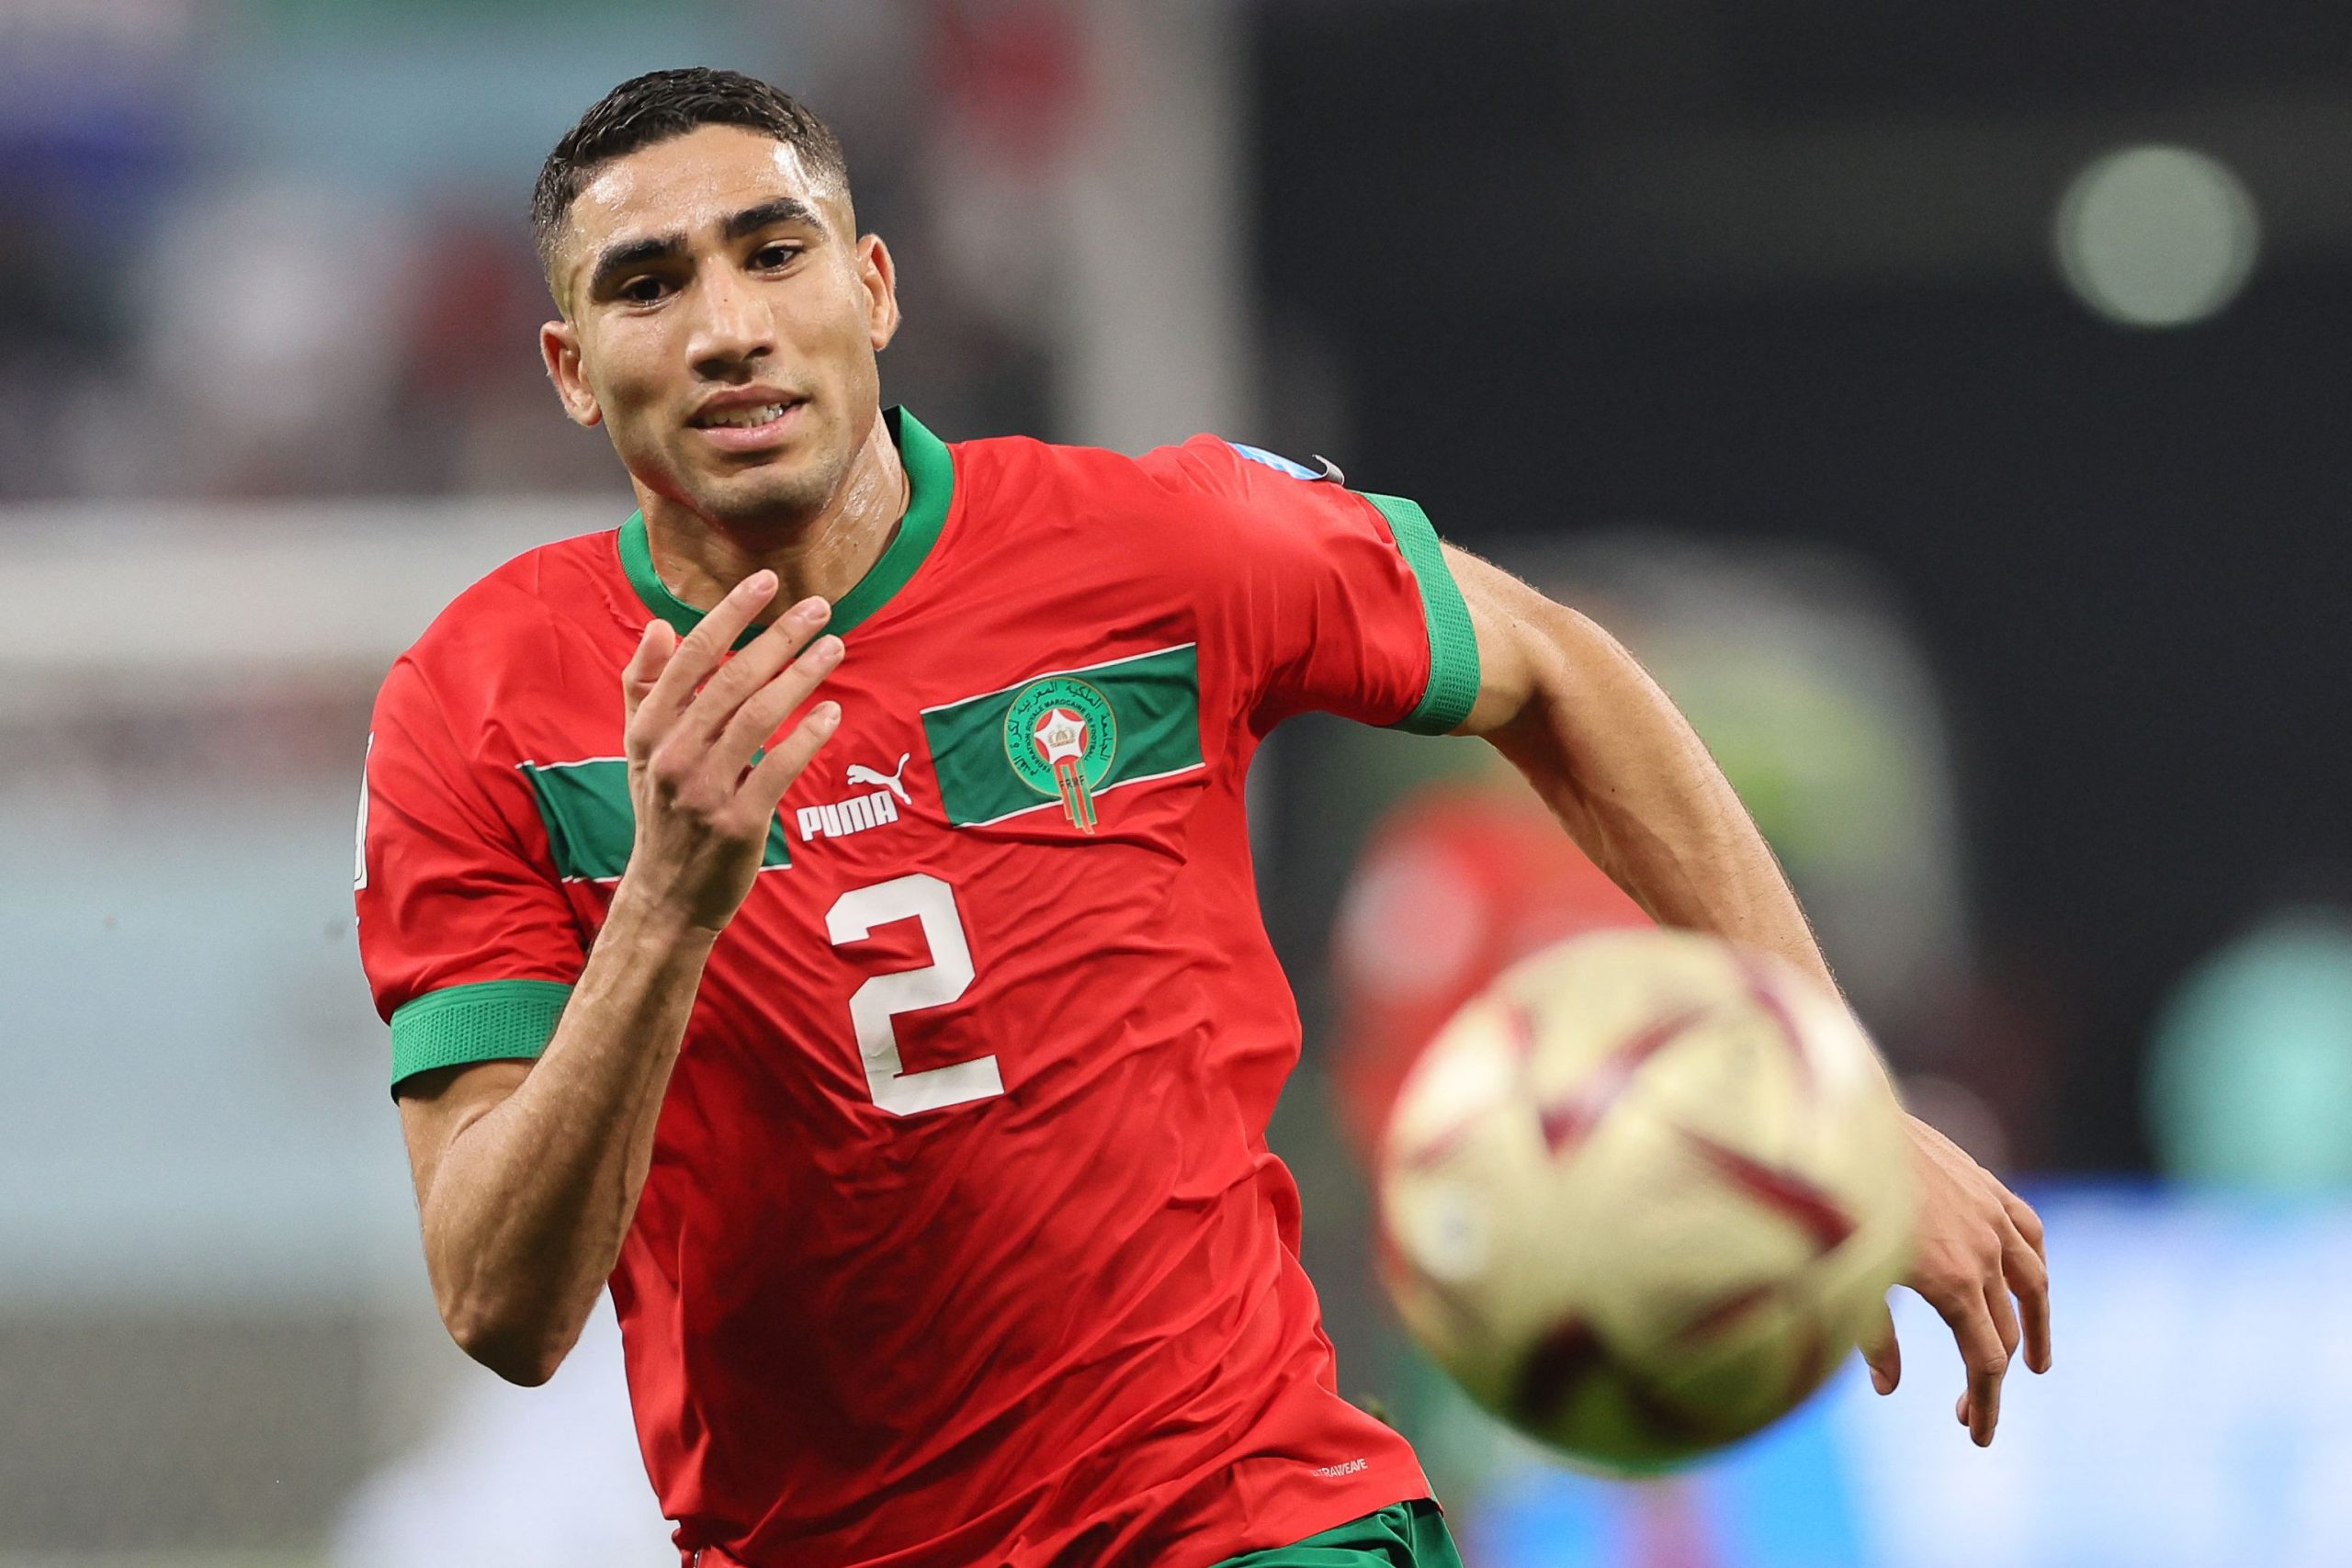 Morocco's defender #02 Achraf Hakimi runs for the ball during the Qatar 2022 World Cup third place play-off football match between Croatia and Morocco at Khalifa International Stadium in Doha on December 17, 2022. (Photo by KARIM JAAFAR / AFP) (Photo by KARIM JAAFAR/AFP via Getty Images)